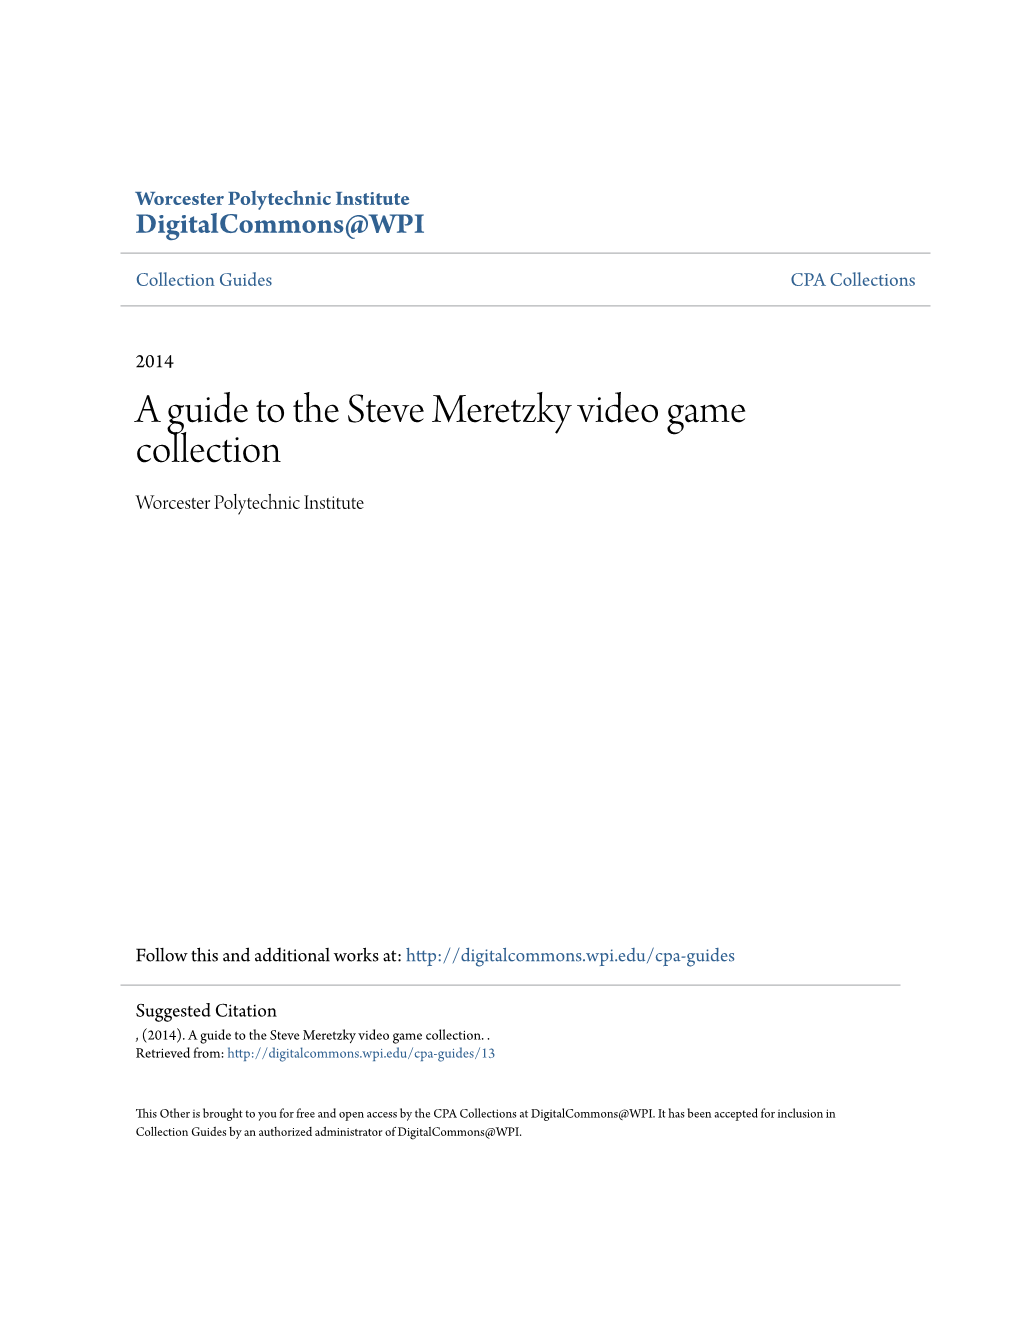 A Guide to the Steve Meretzky Video Game Collection Worcester Polytechnic Institute